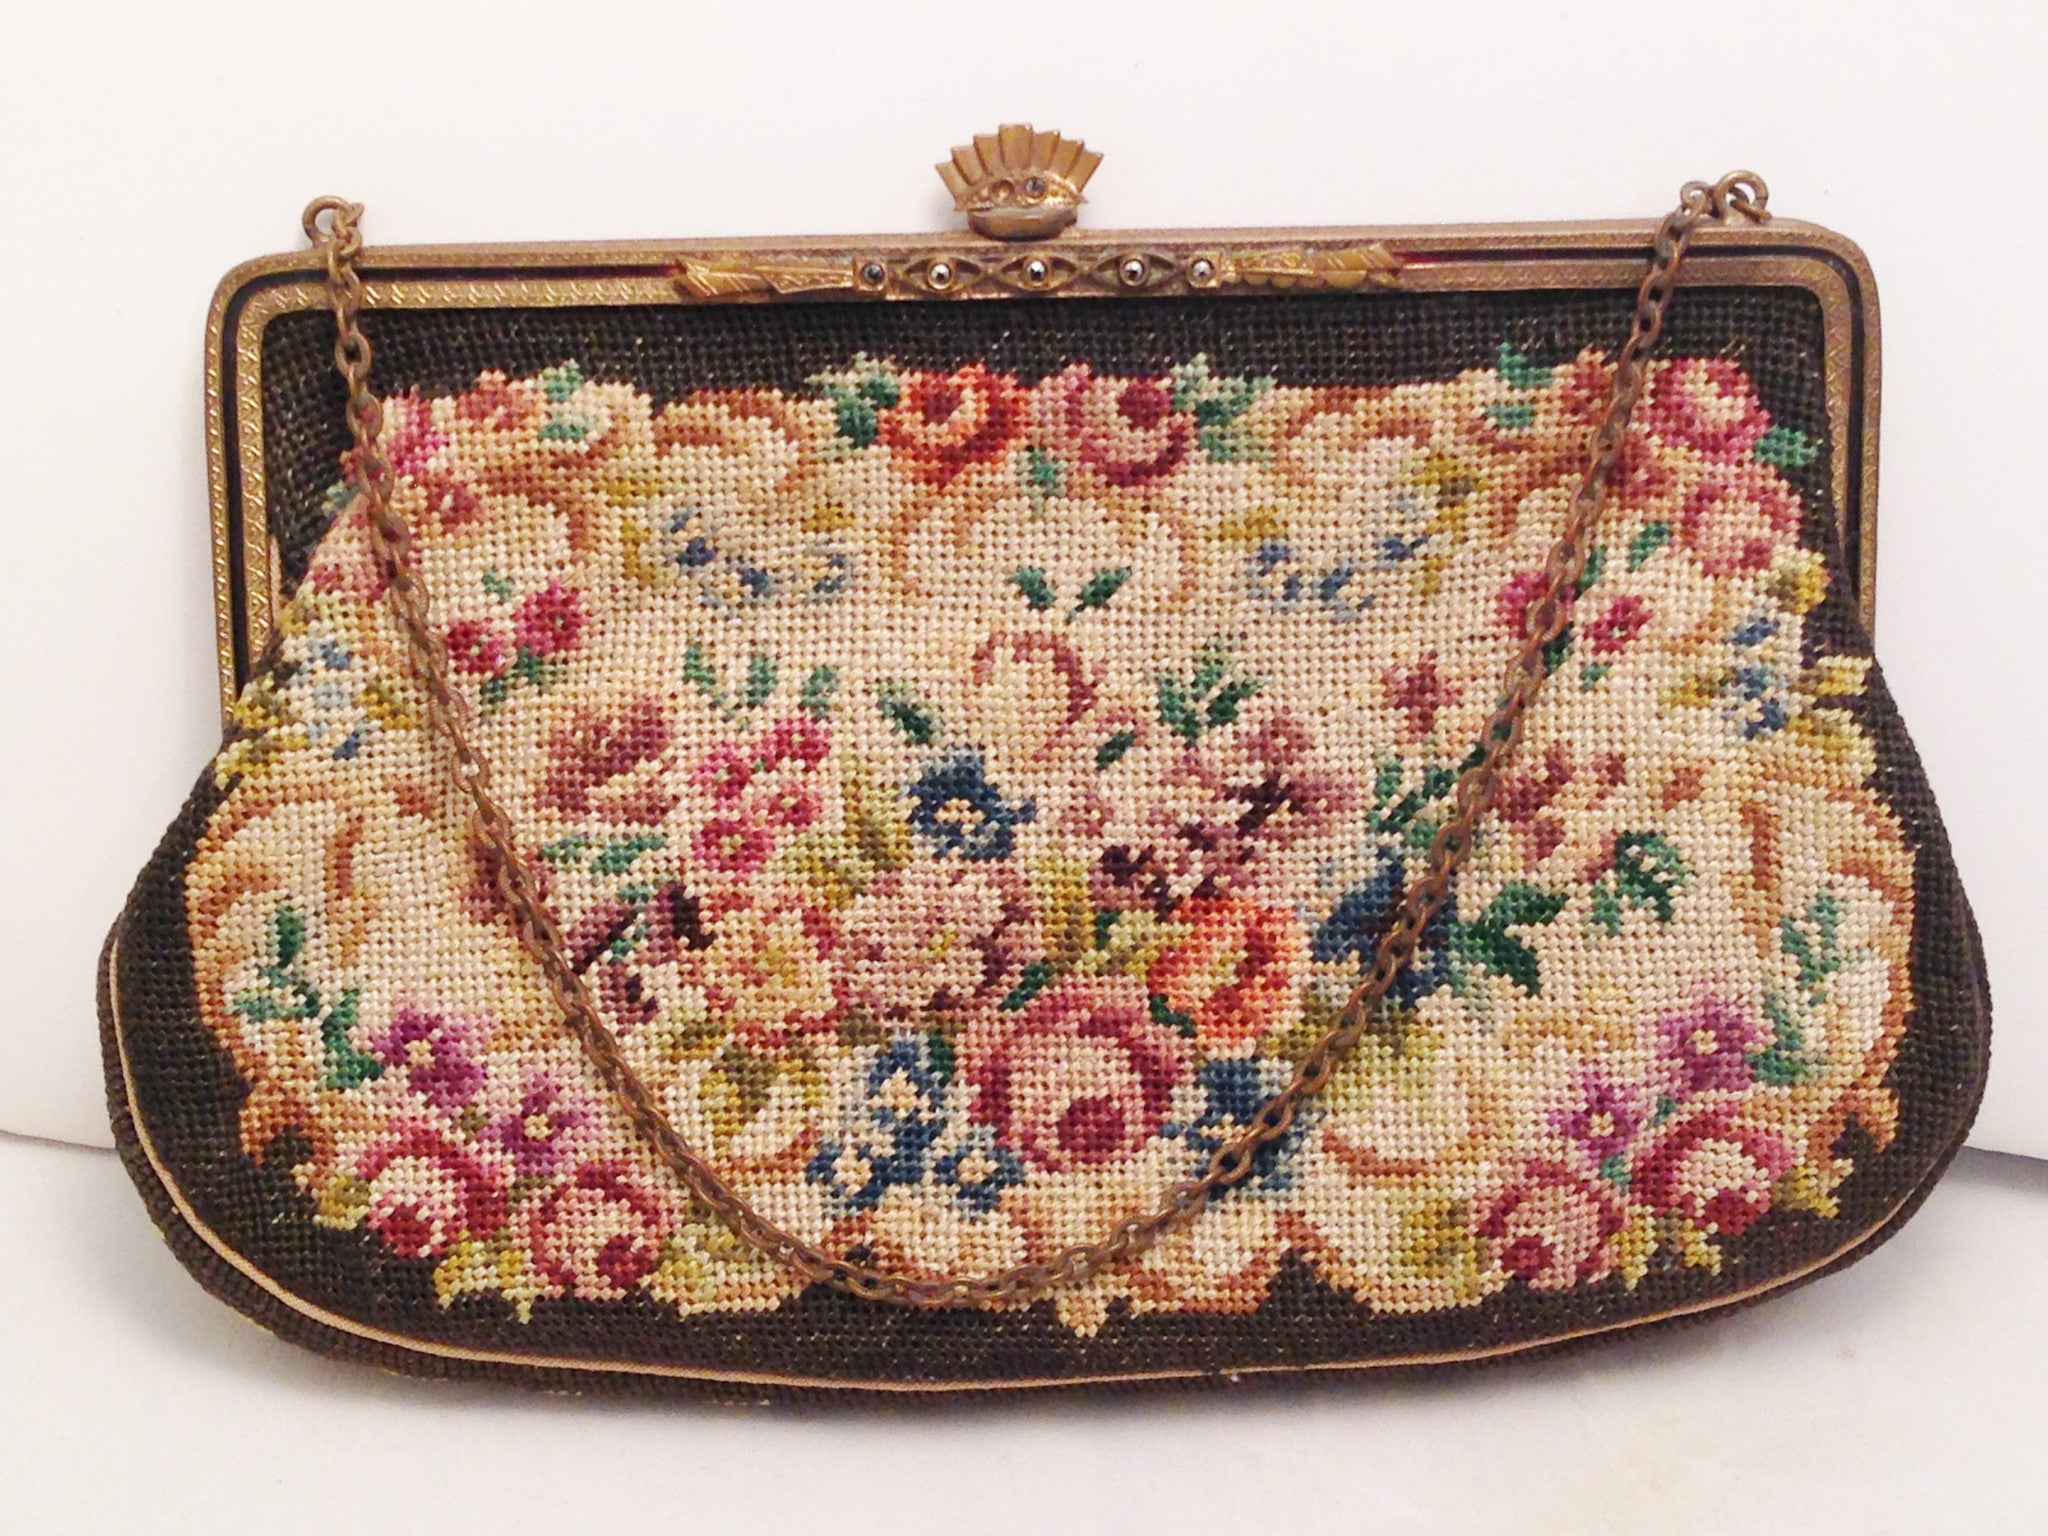 Antique Petit Point Needlepoint Tapestry Handbag – Hers and His Treasures